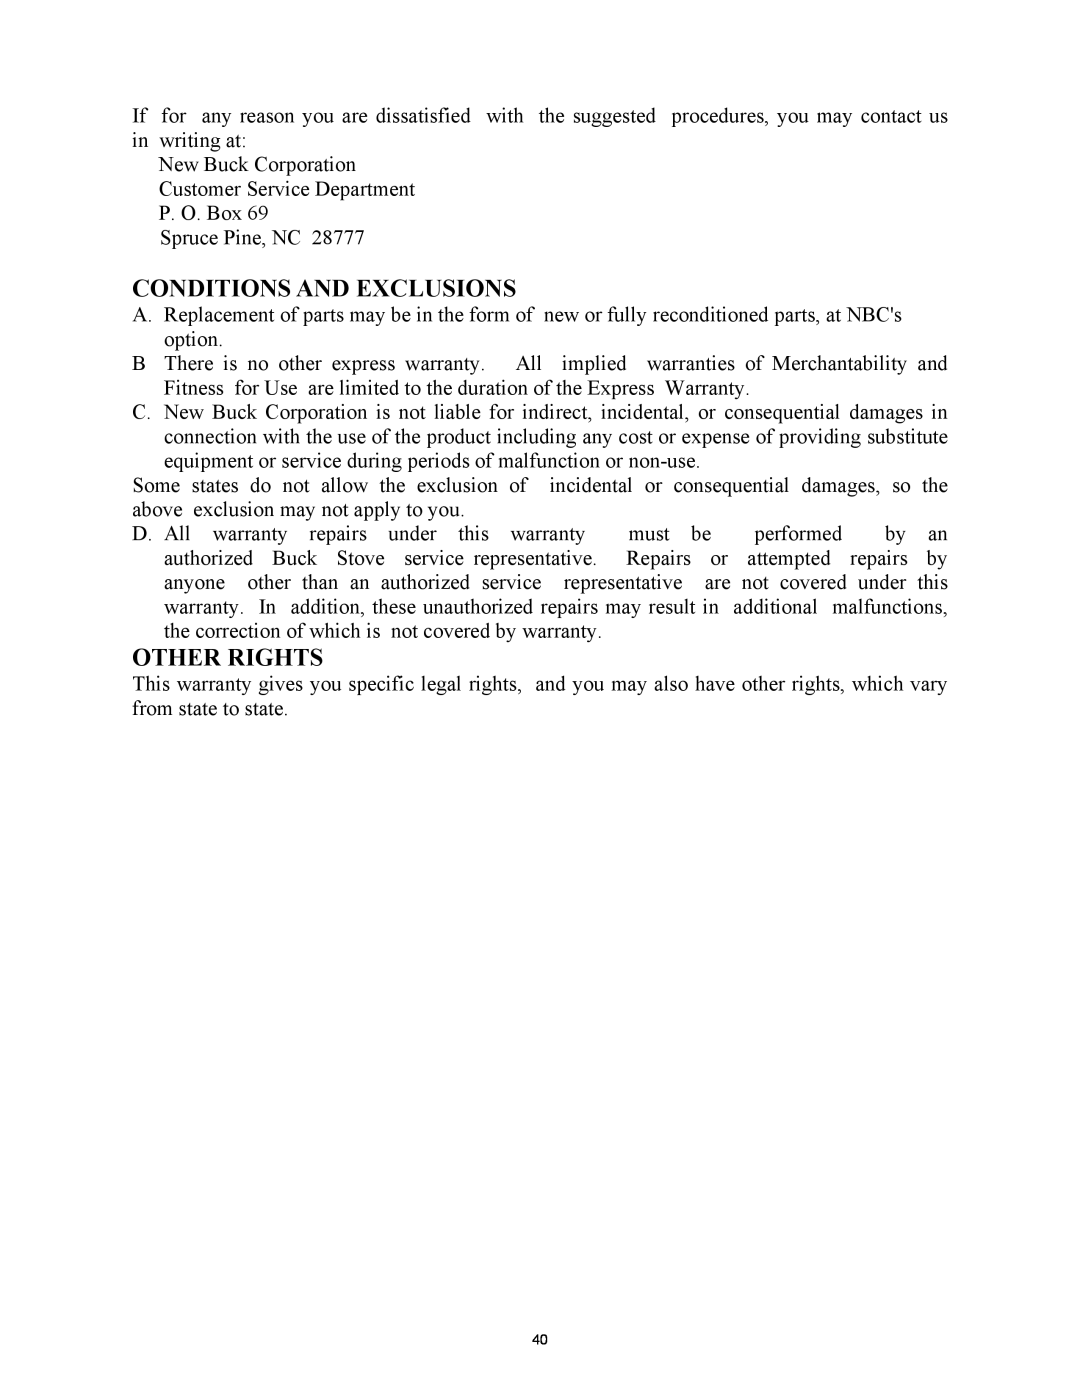 New Buck Corporation 21 installation instructions Conditions And Exclusions, Other Rights 